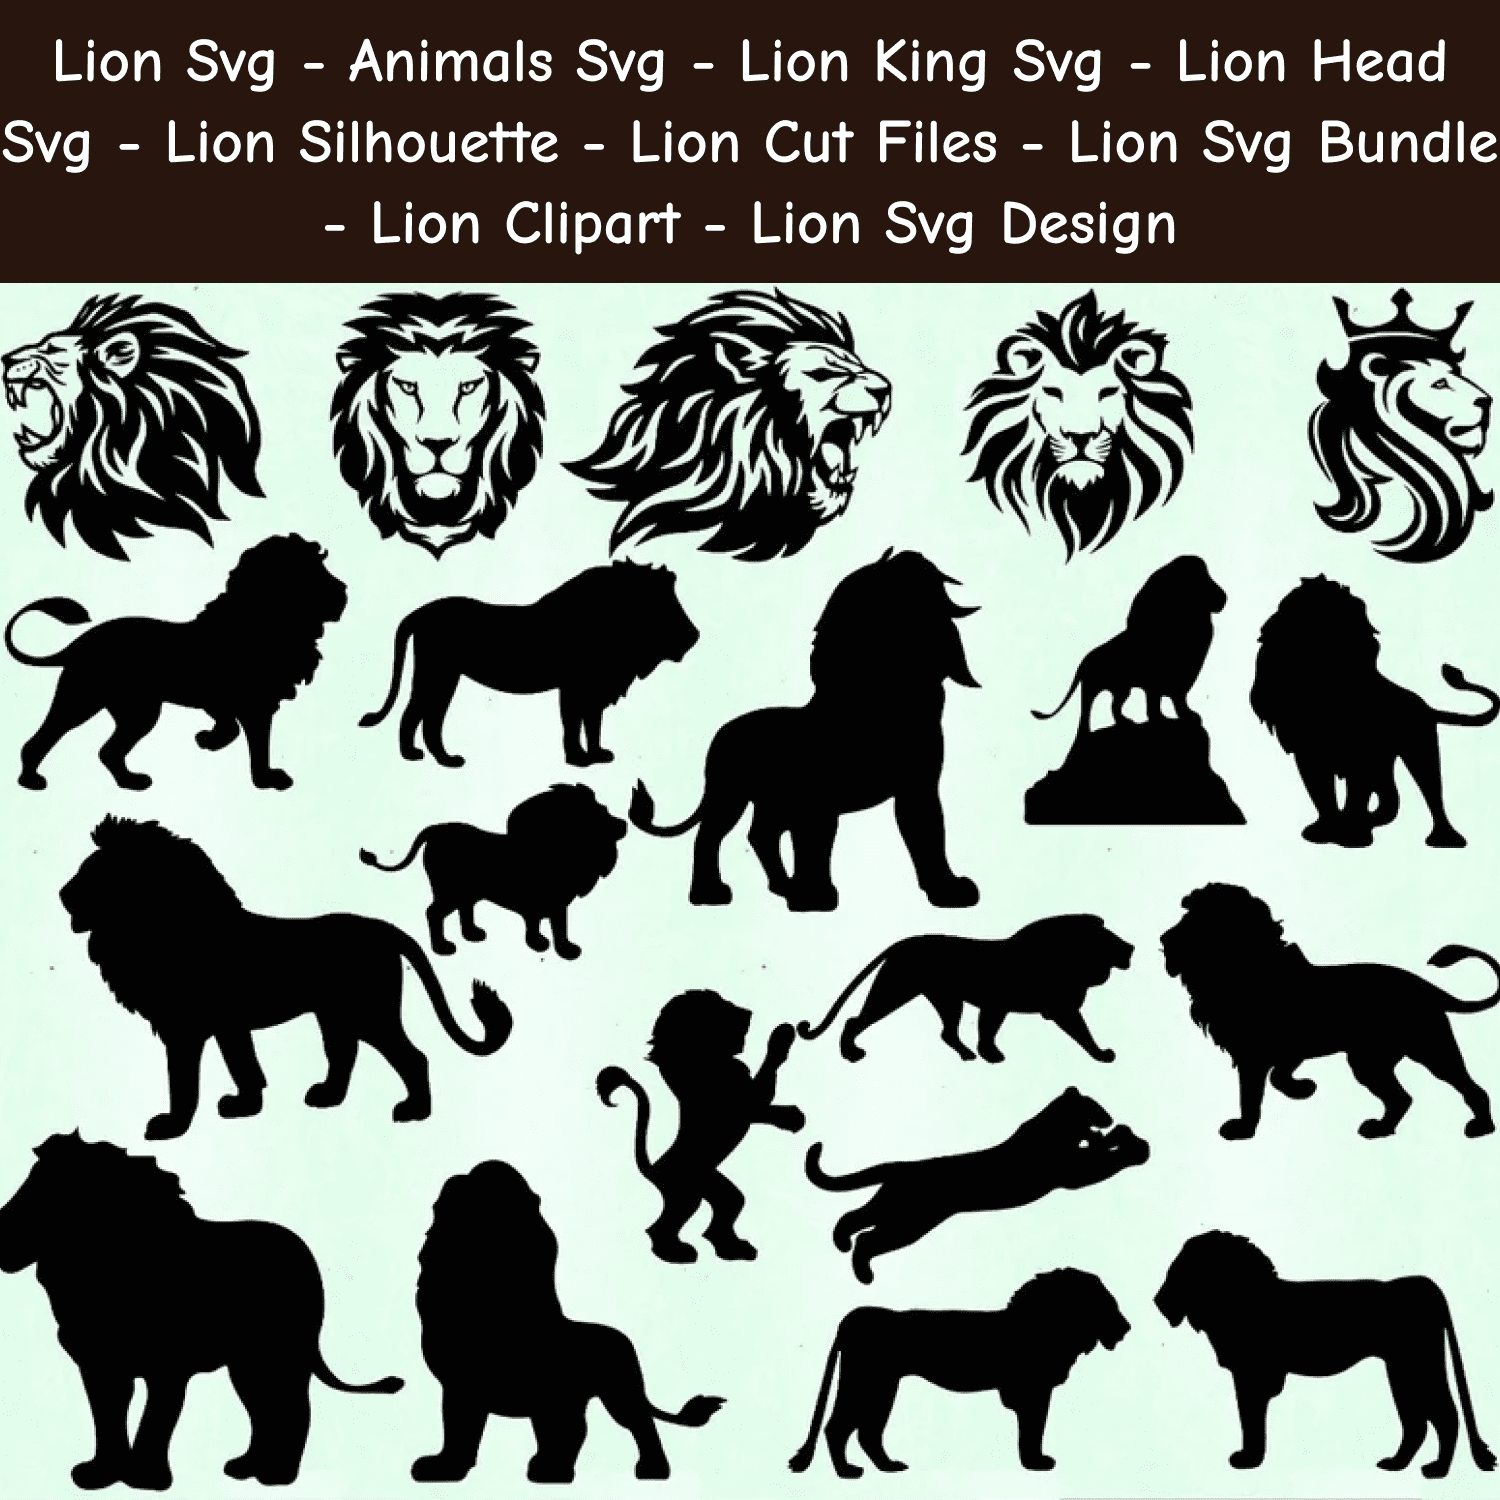 Lion King Svg main cover.